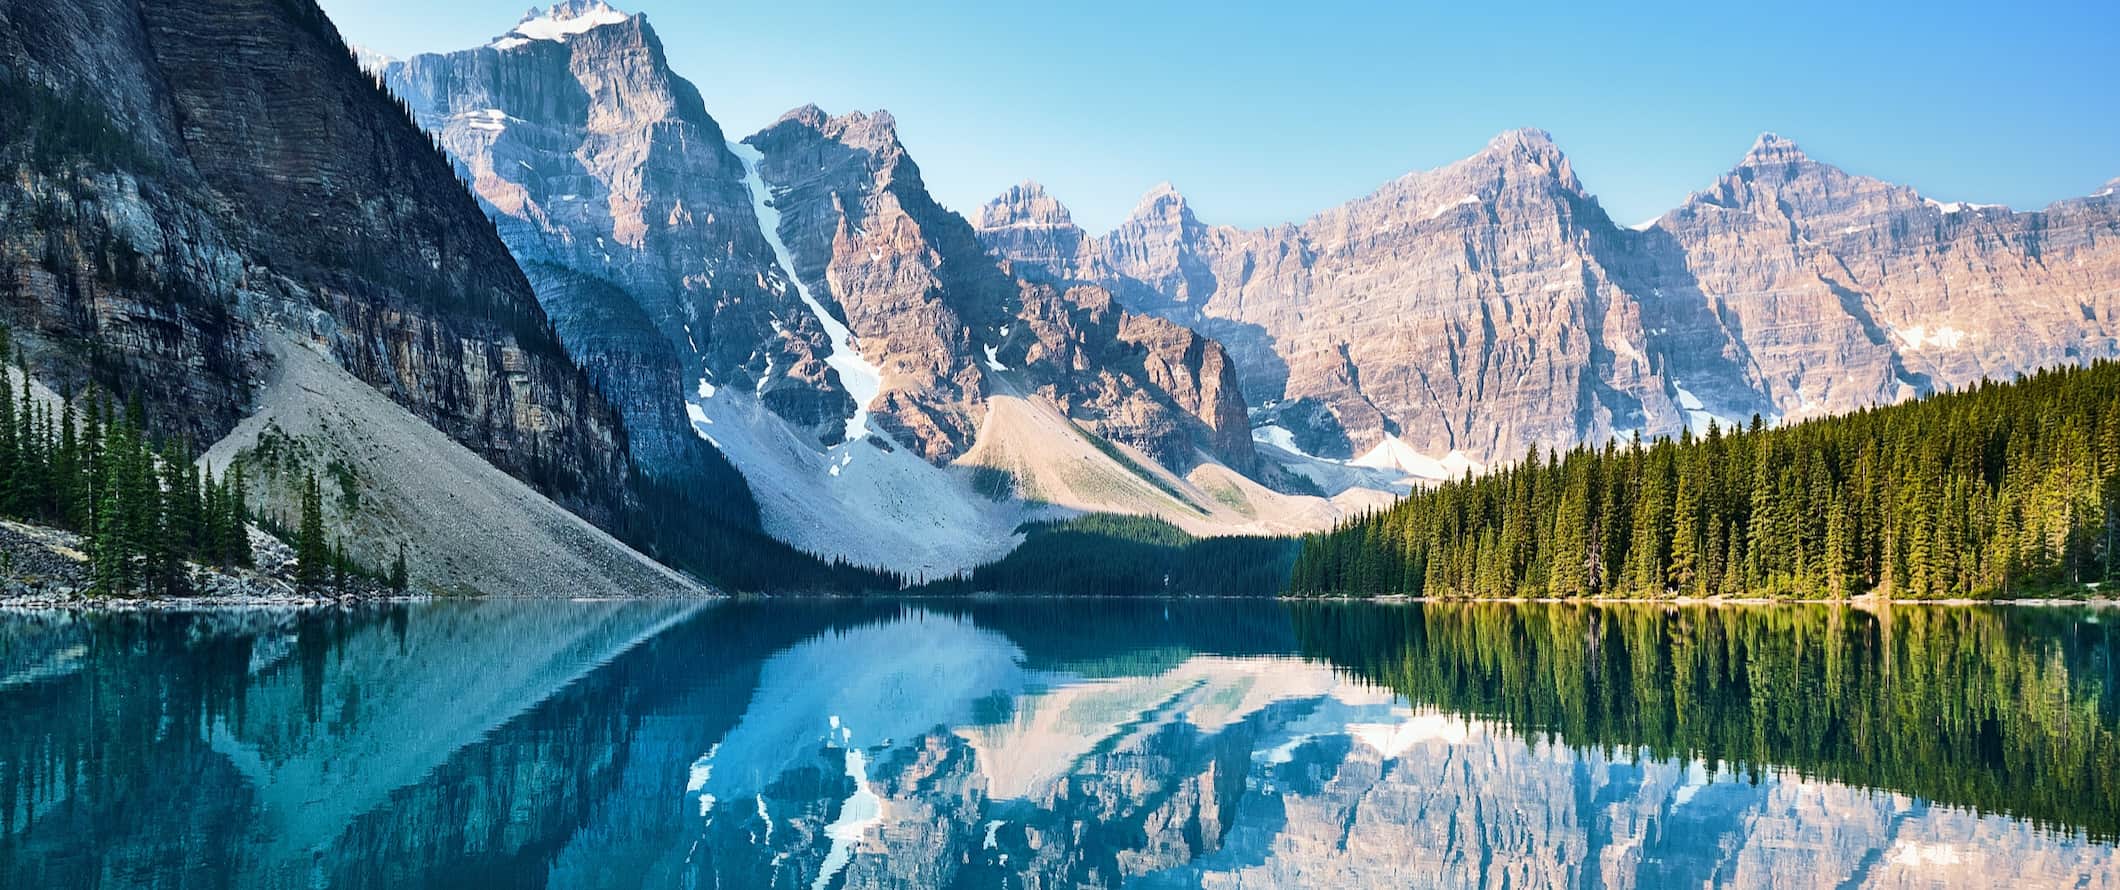 the stunning Canadian rockies towering over western Canada